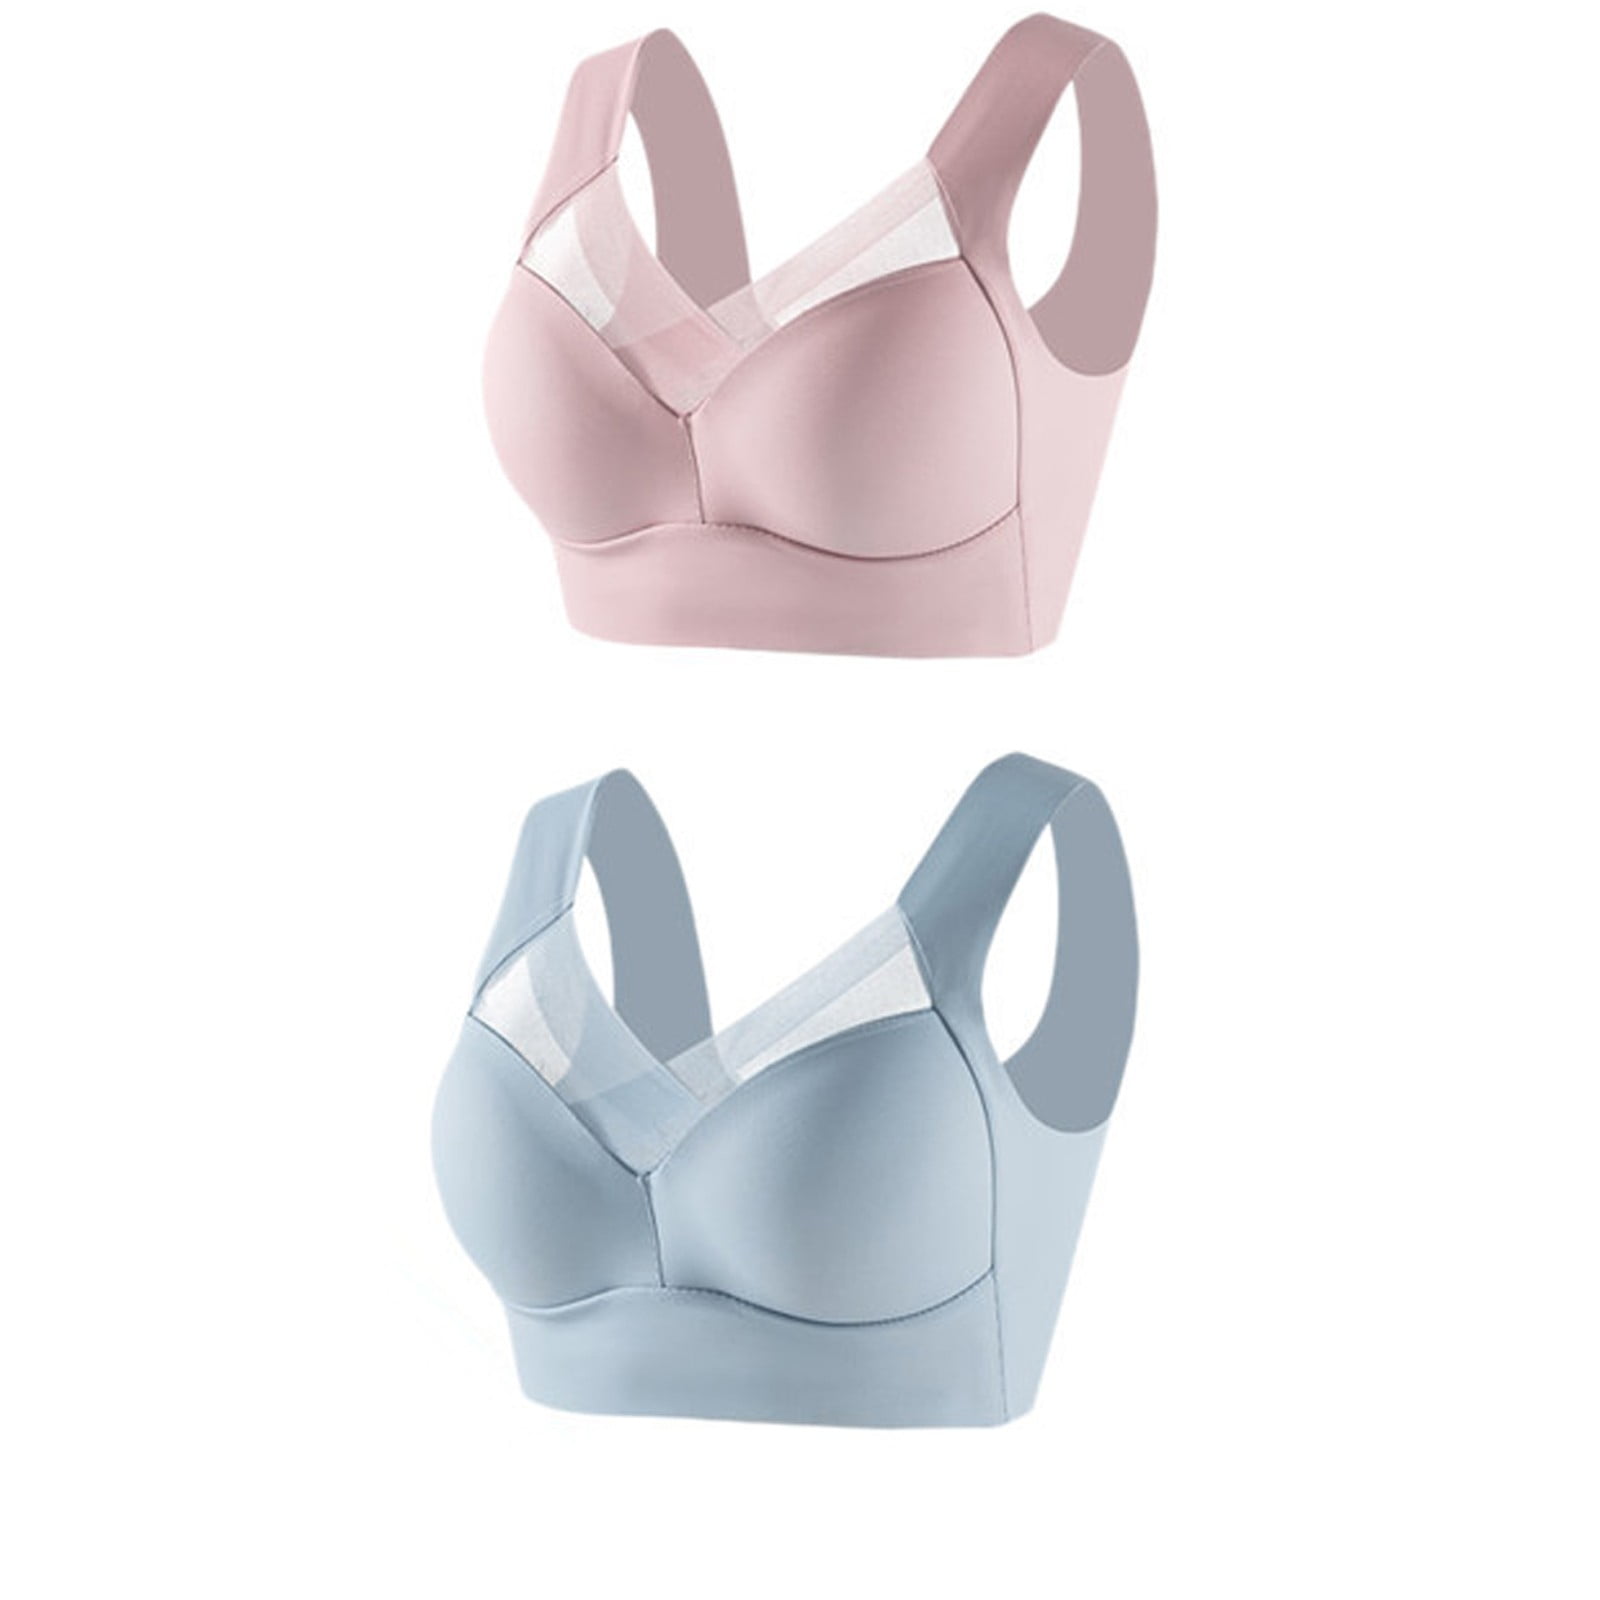 Bustier Seamless Wmbra Posture Correction Bra Without Underwire